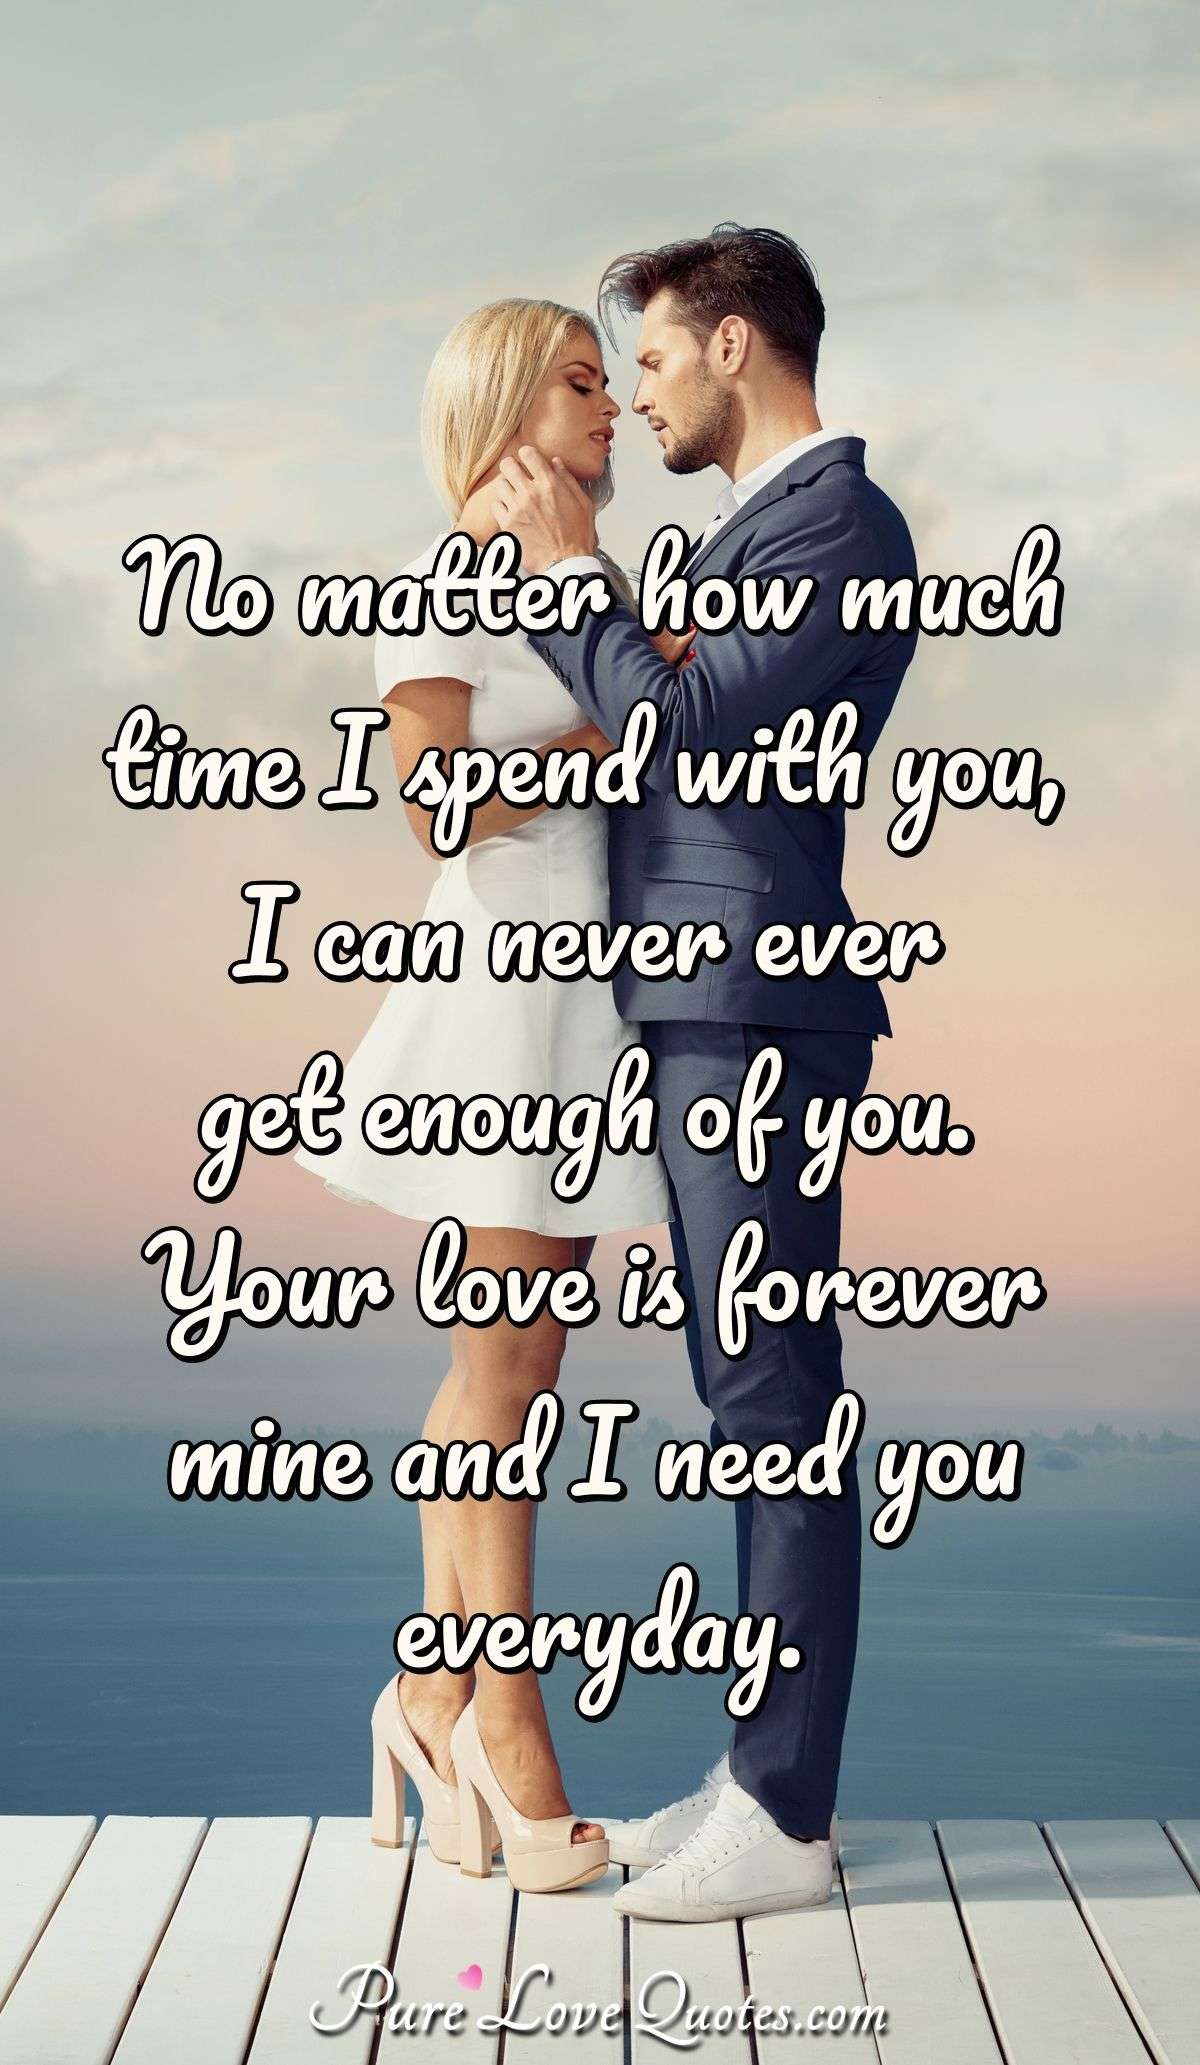 No matter time I with you, I can never ever get enough of you.... | PureLoveQuotes